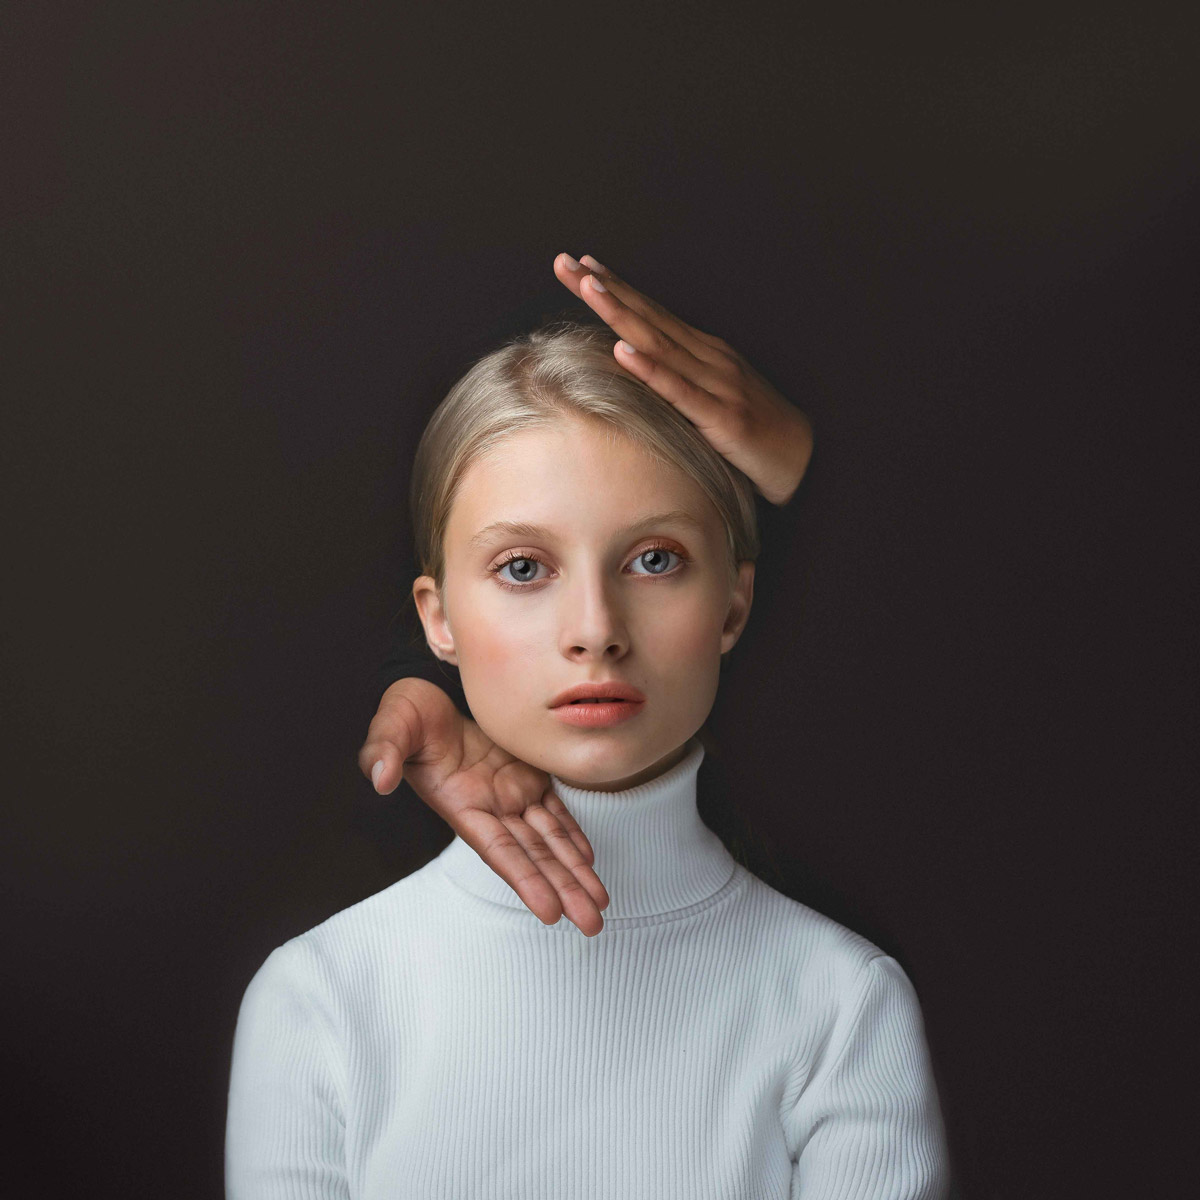 I Know How to Shape My Face so That No One Will Notice Sadness, © Mariola Glajcar, Poland, September 2019 Winner, CPC Portrait Awards